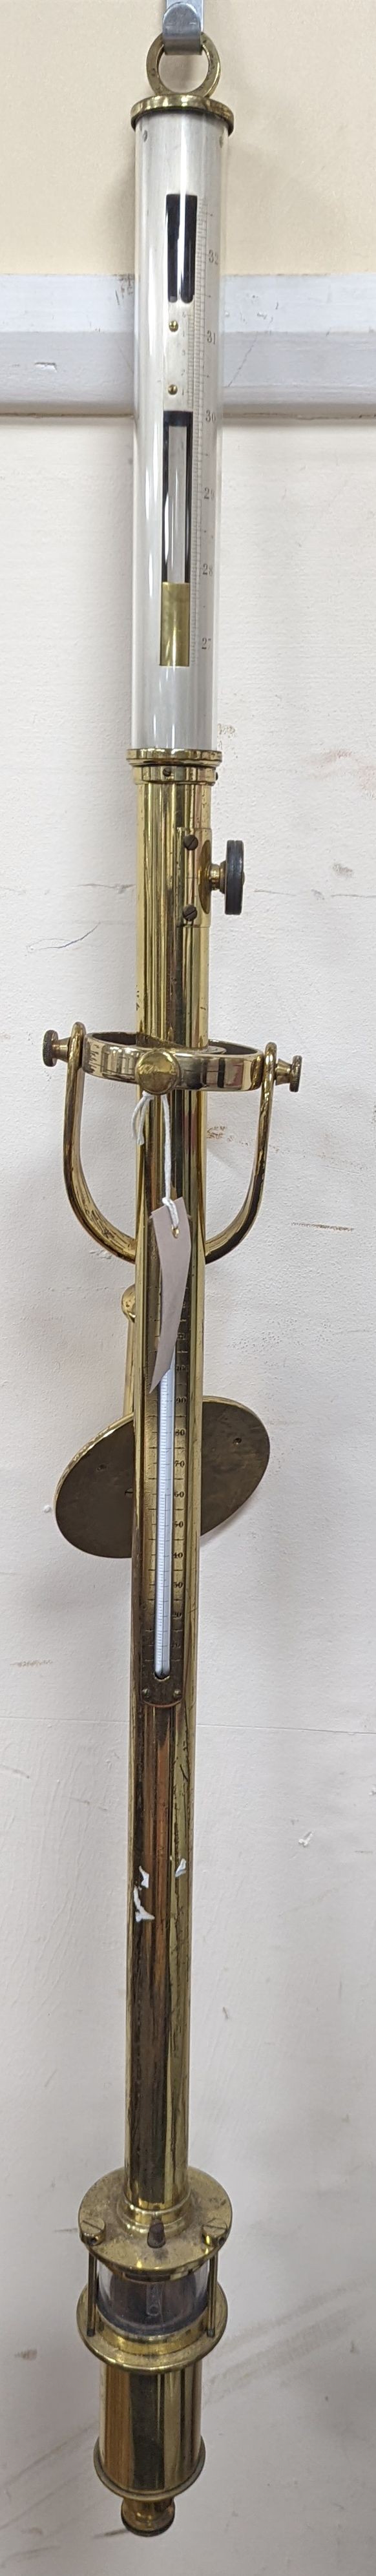 A brass ship's barometer and thermometer with gimbled wall mount, height 100cm